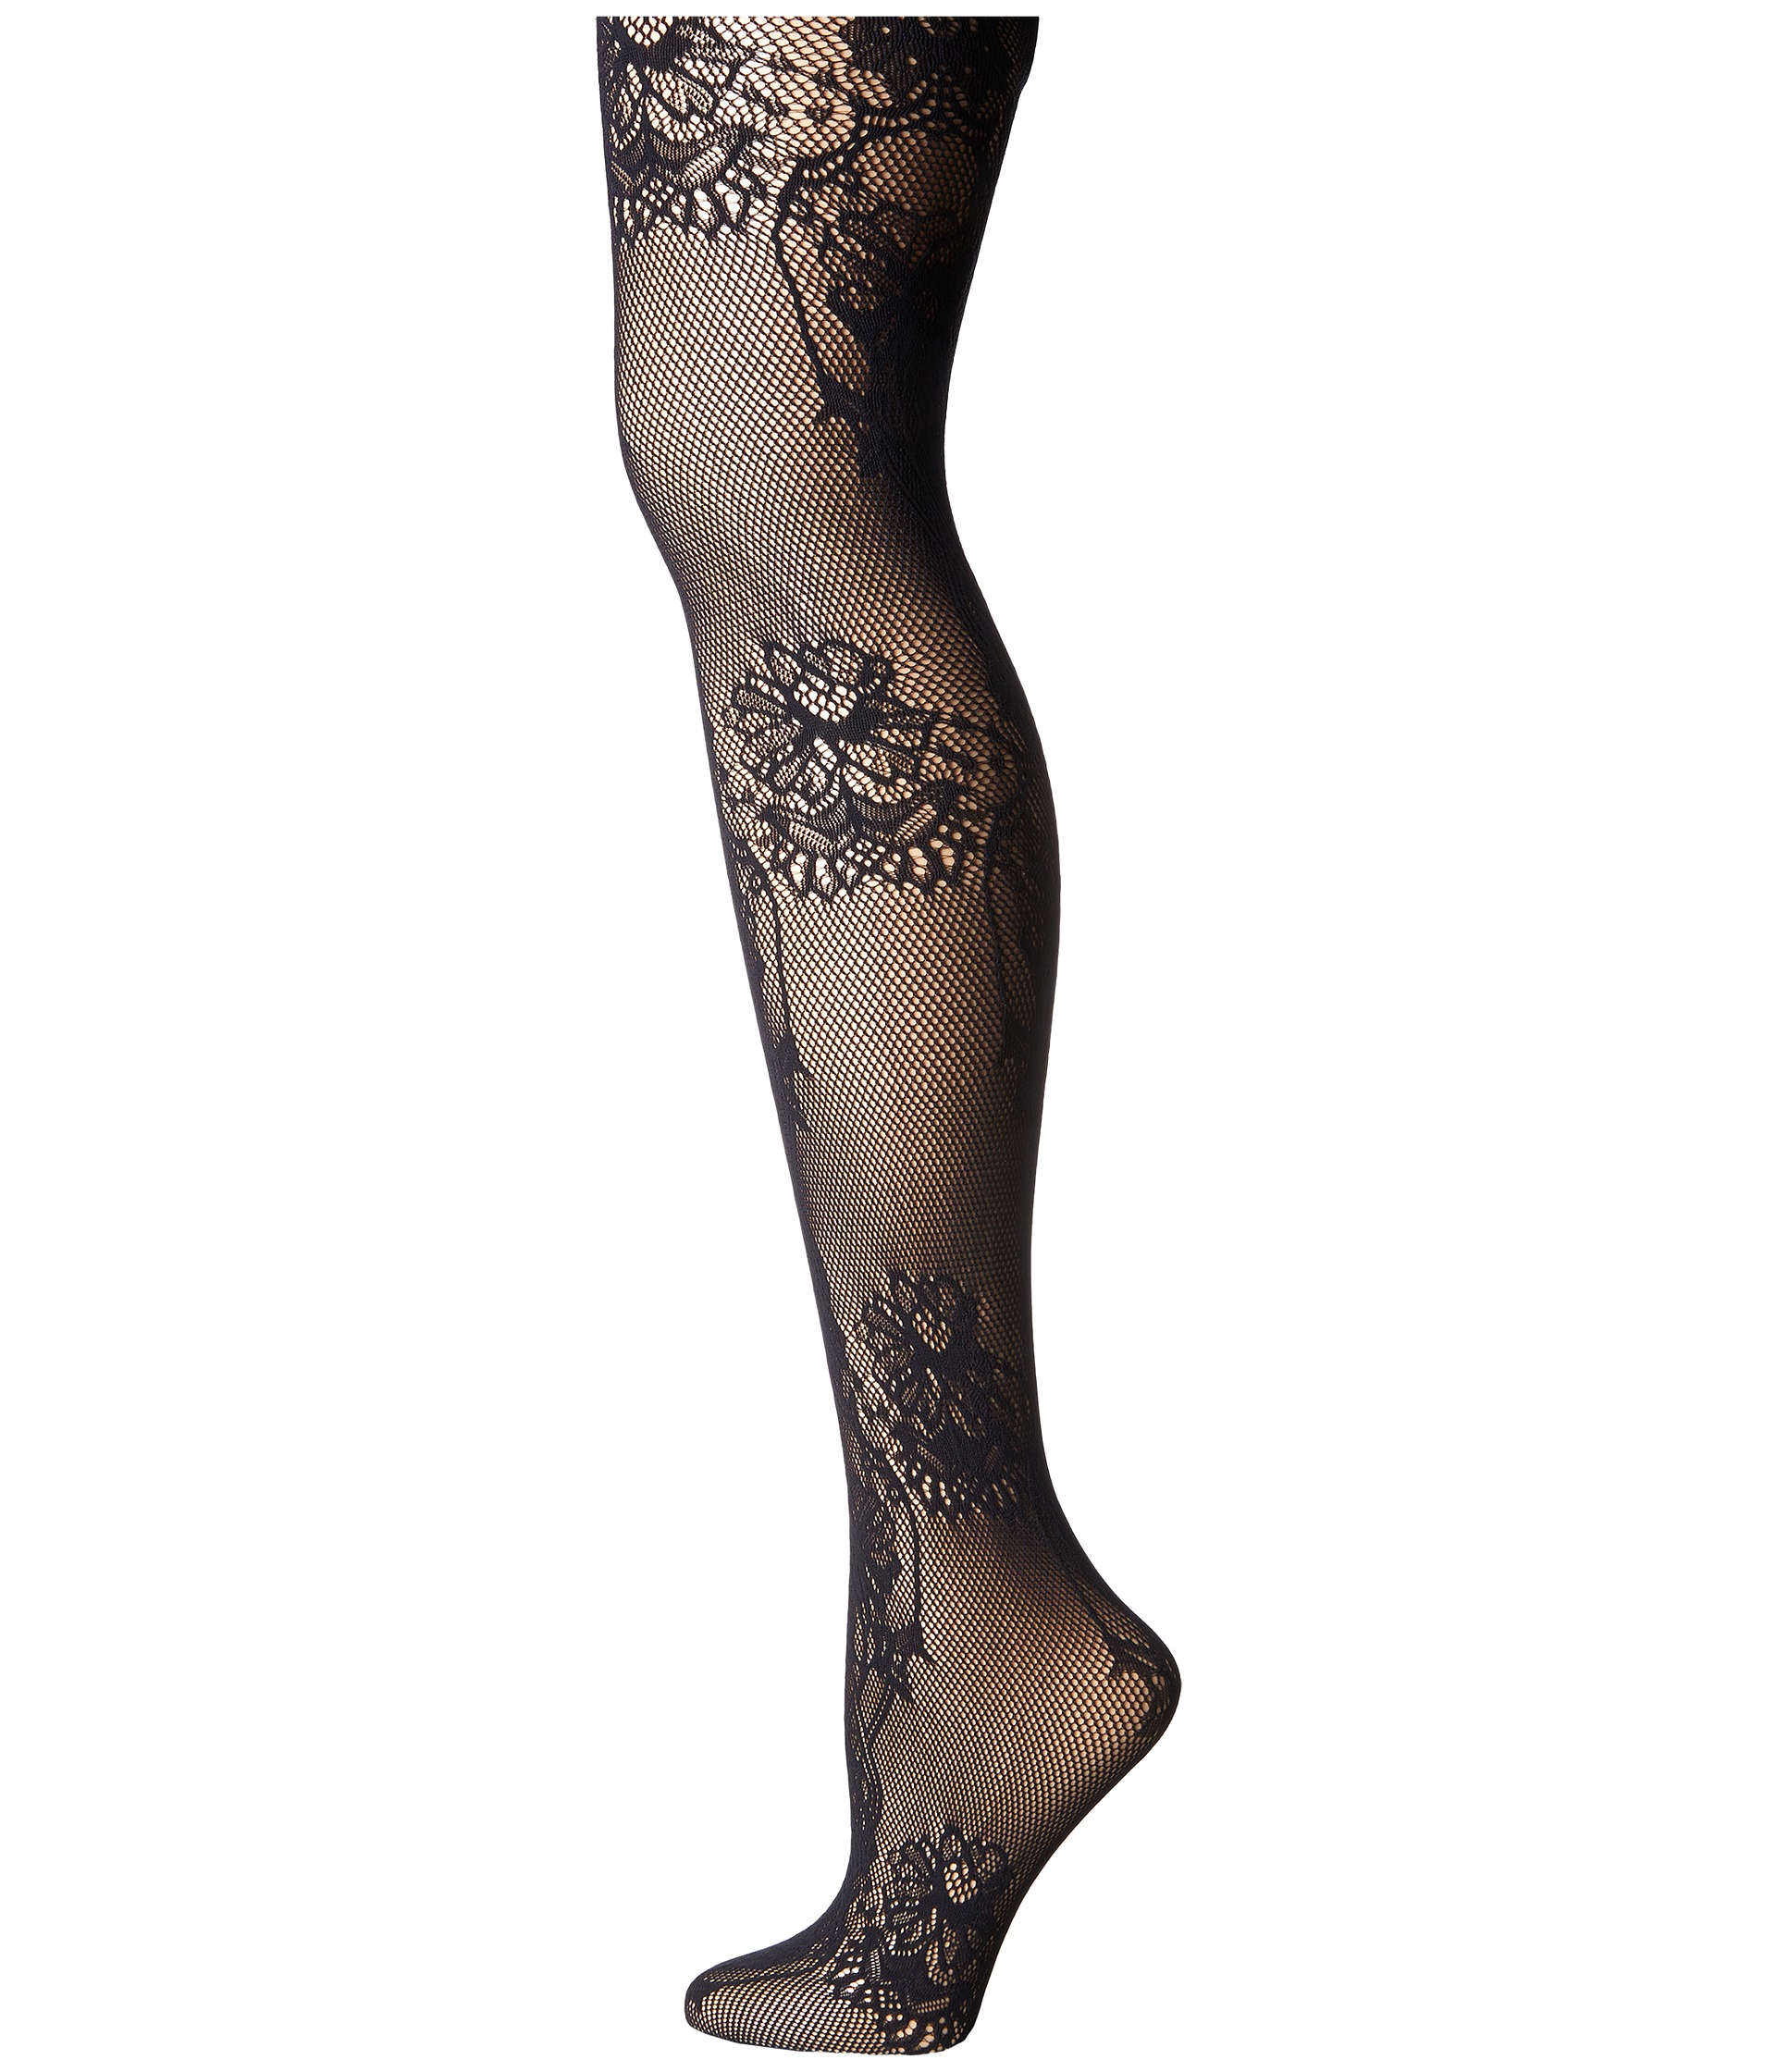 Wolford Net Lace Tights - Zappos.com Free Shipping BOTH Ways